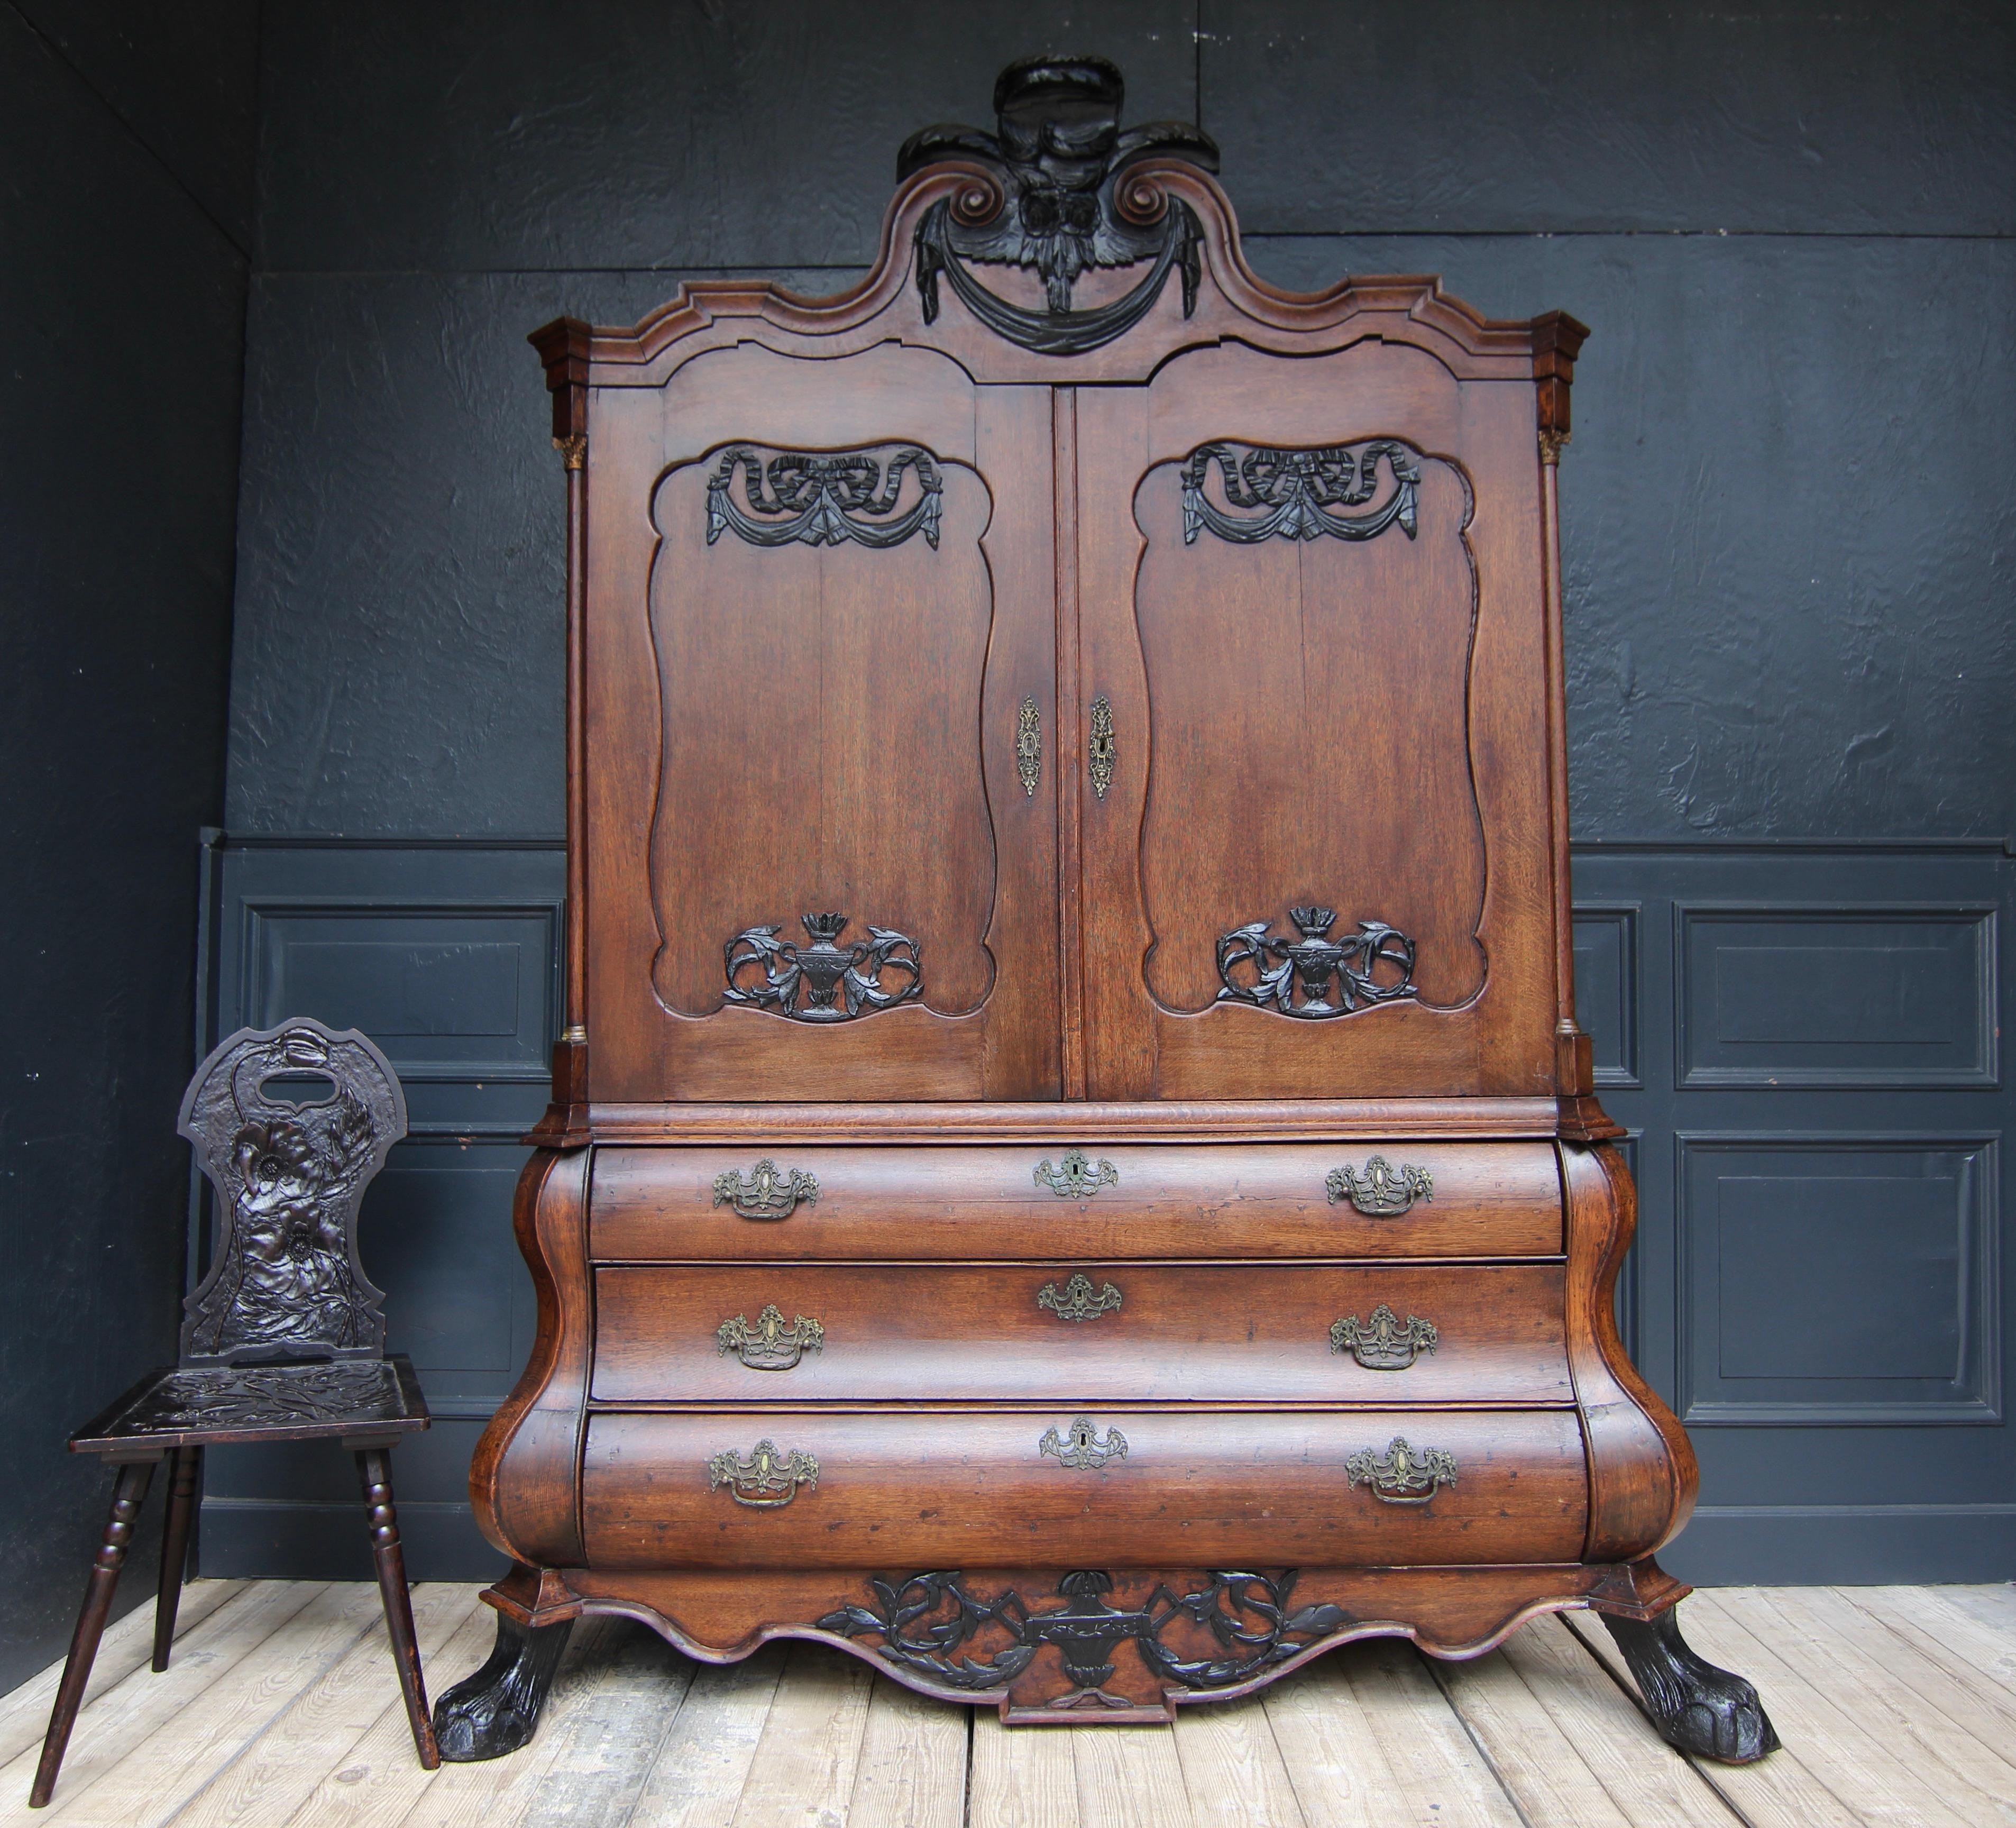 Dutch Baroque cabinet or linen press from the 2nd half of the 18th century. Solidly crafted in oak and accentuated with ebonised carved decoration and cast bronze fittings.

The cabinet consists of a three-bay chest base with convex-concave-convex